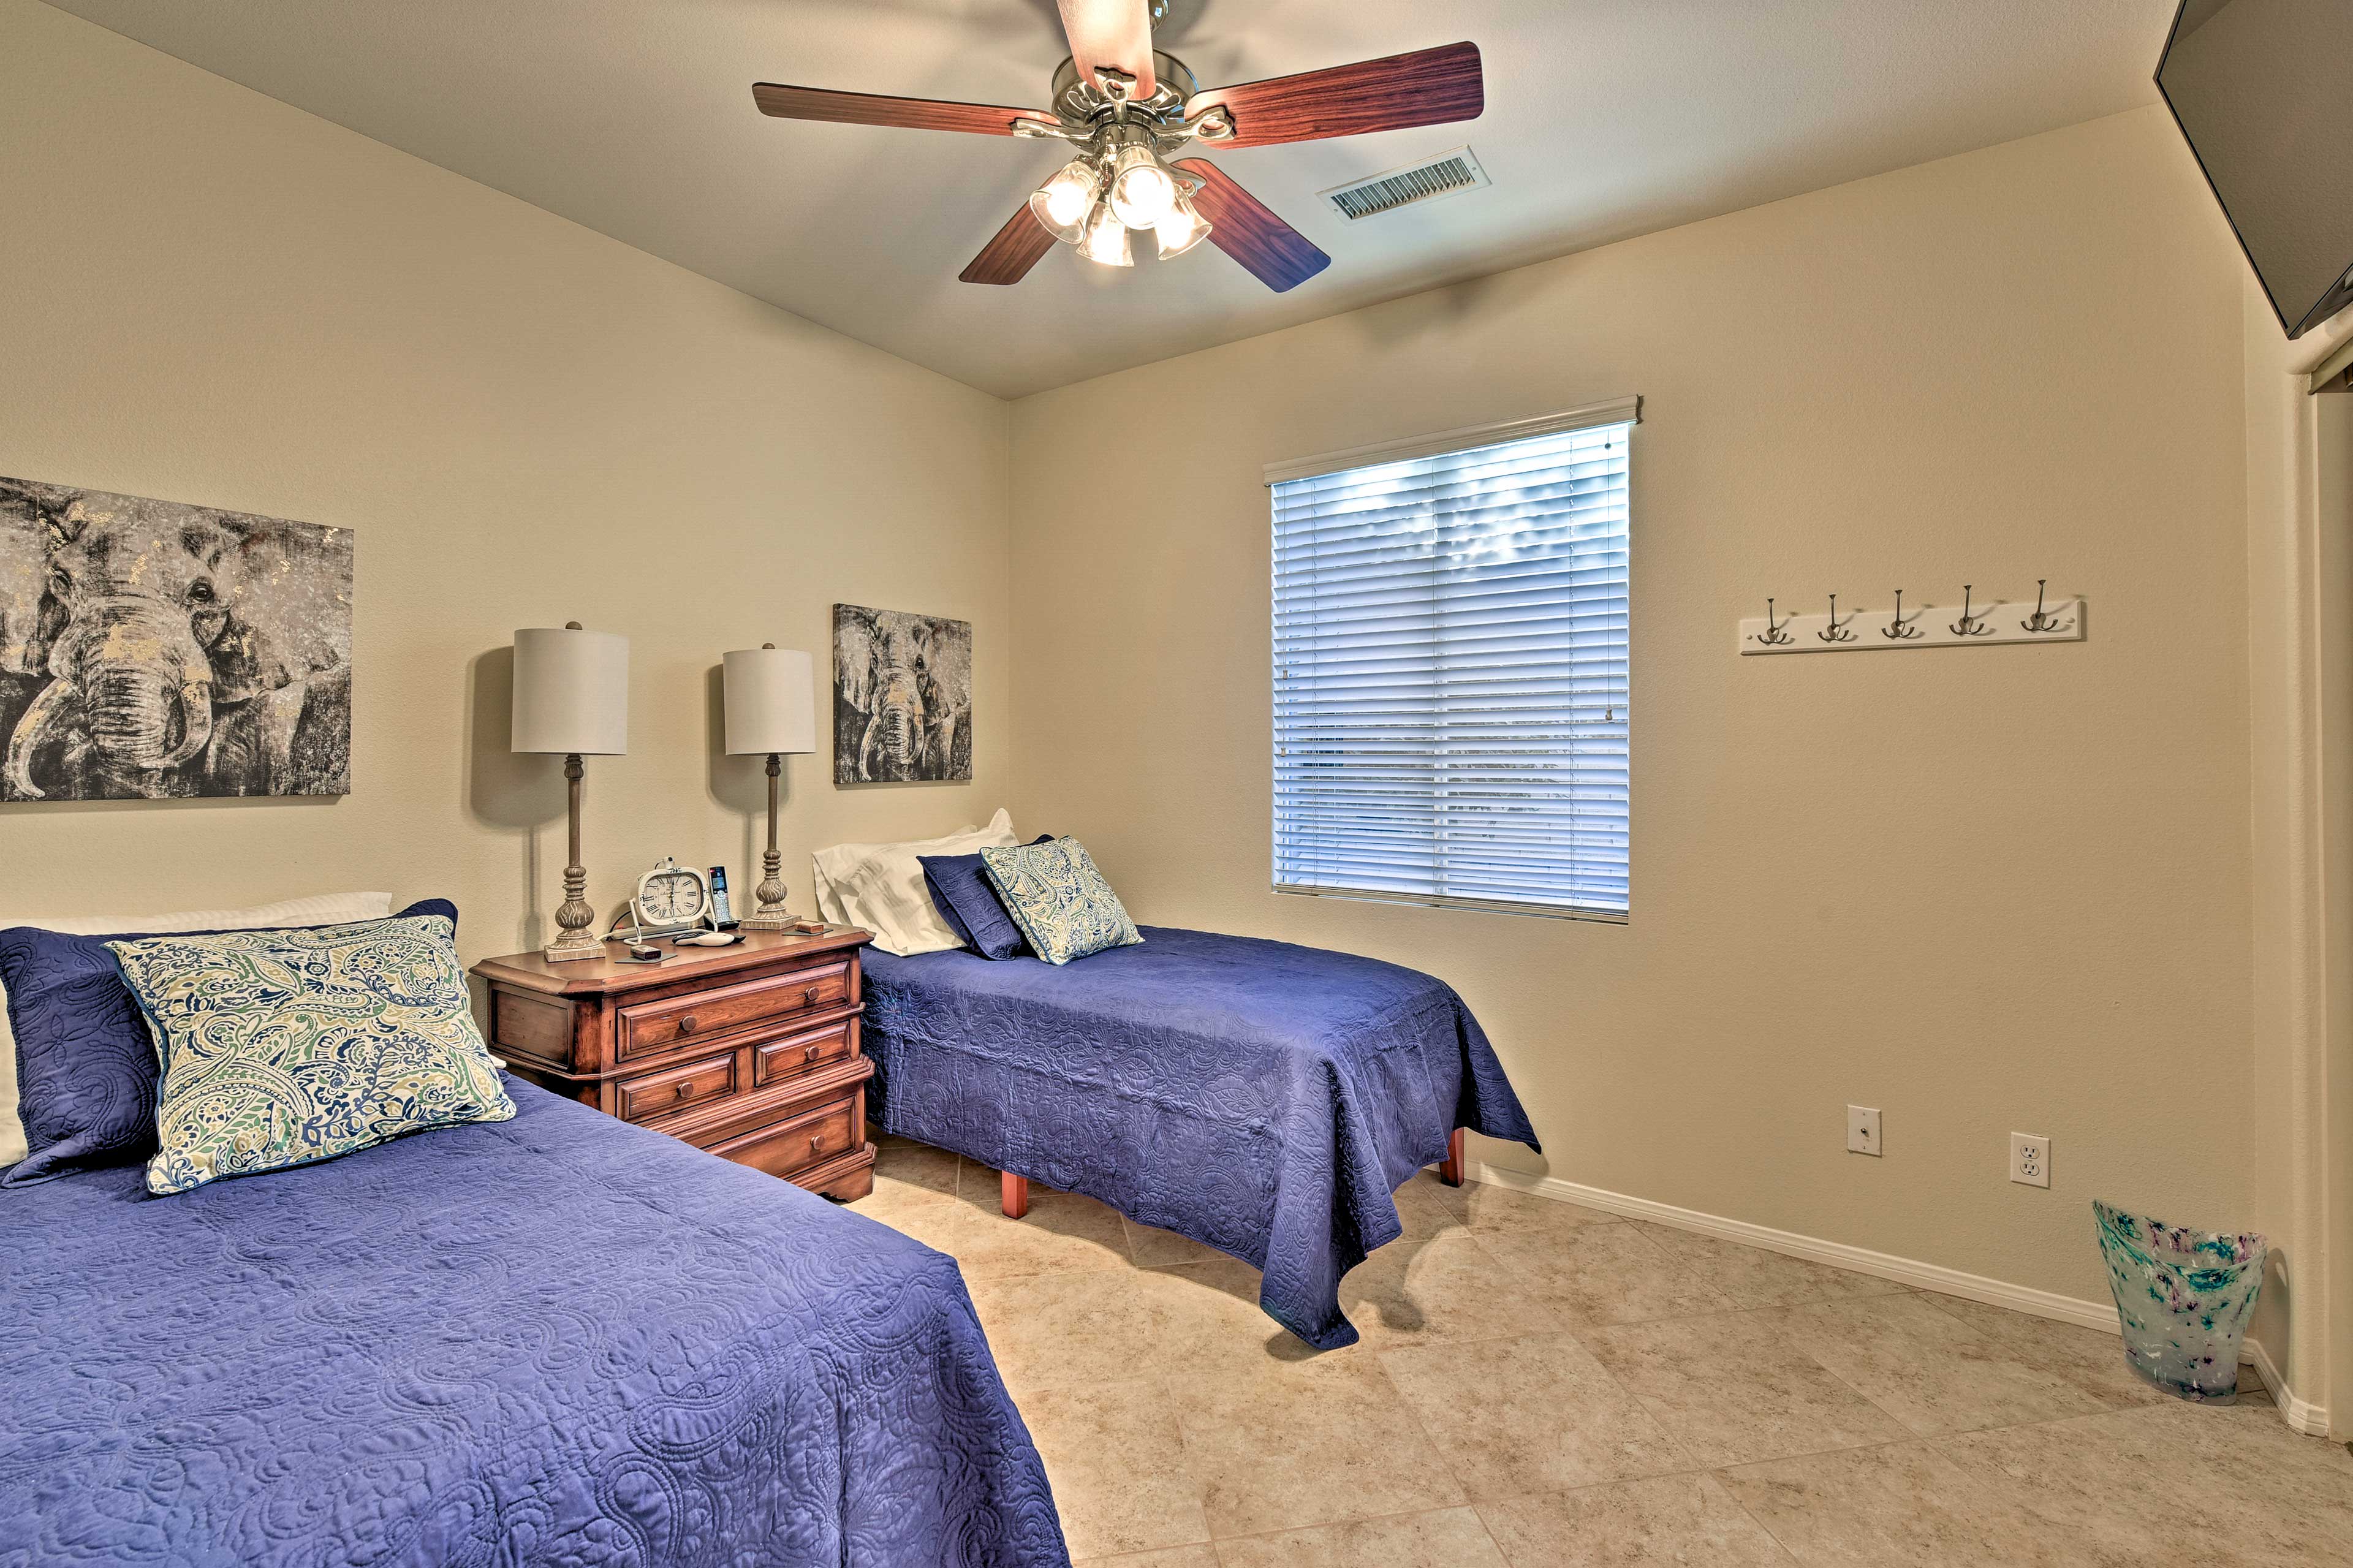 Send the kids off to sleep in this third bedroom housing 2 twin-sized beds.